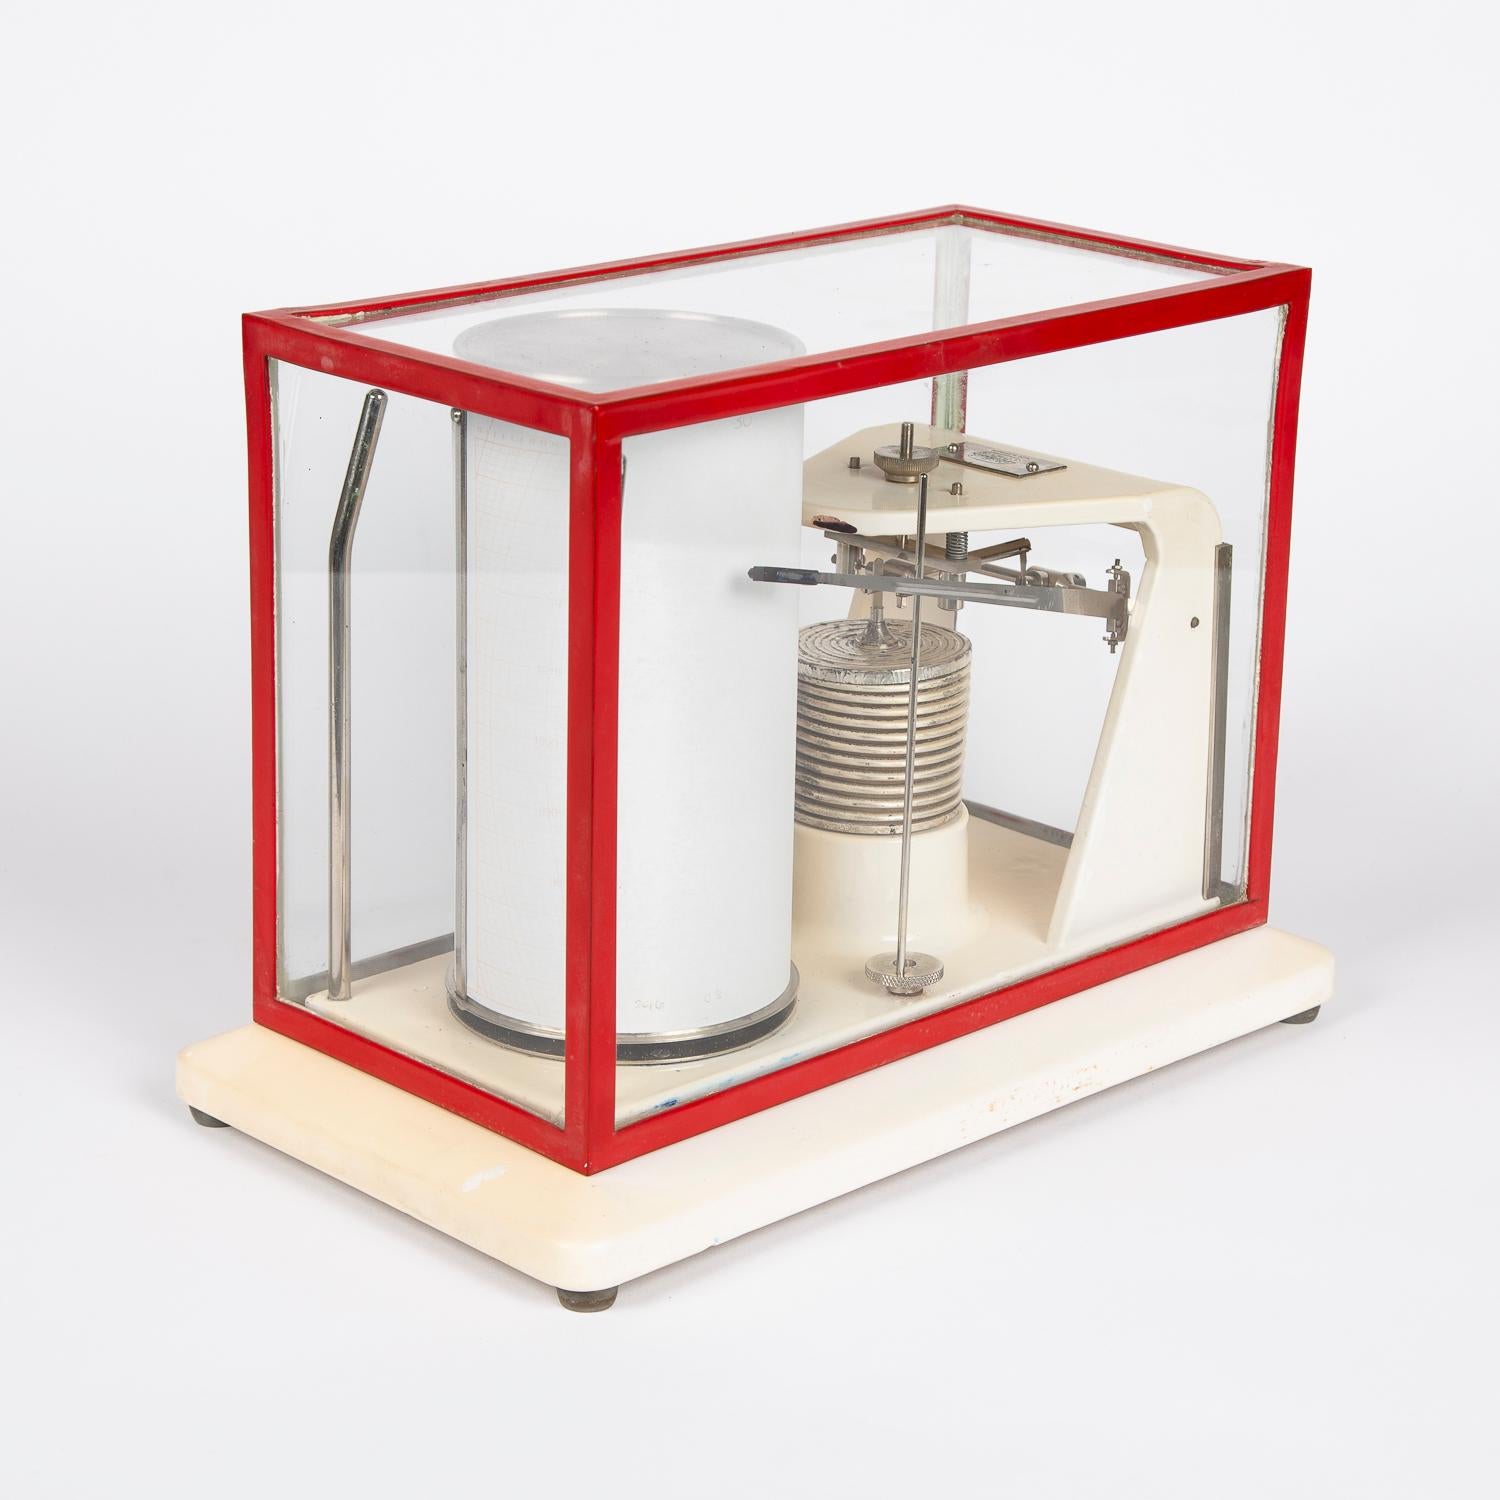 An open scale barograph by C F Casella & Co of London, circa 1960.

7 day clockwork 